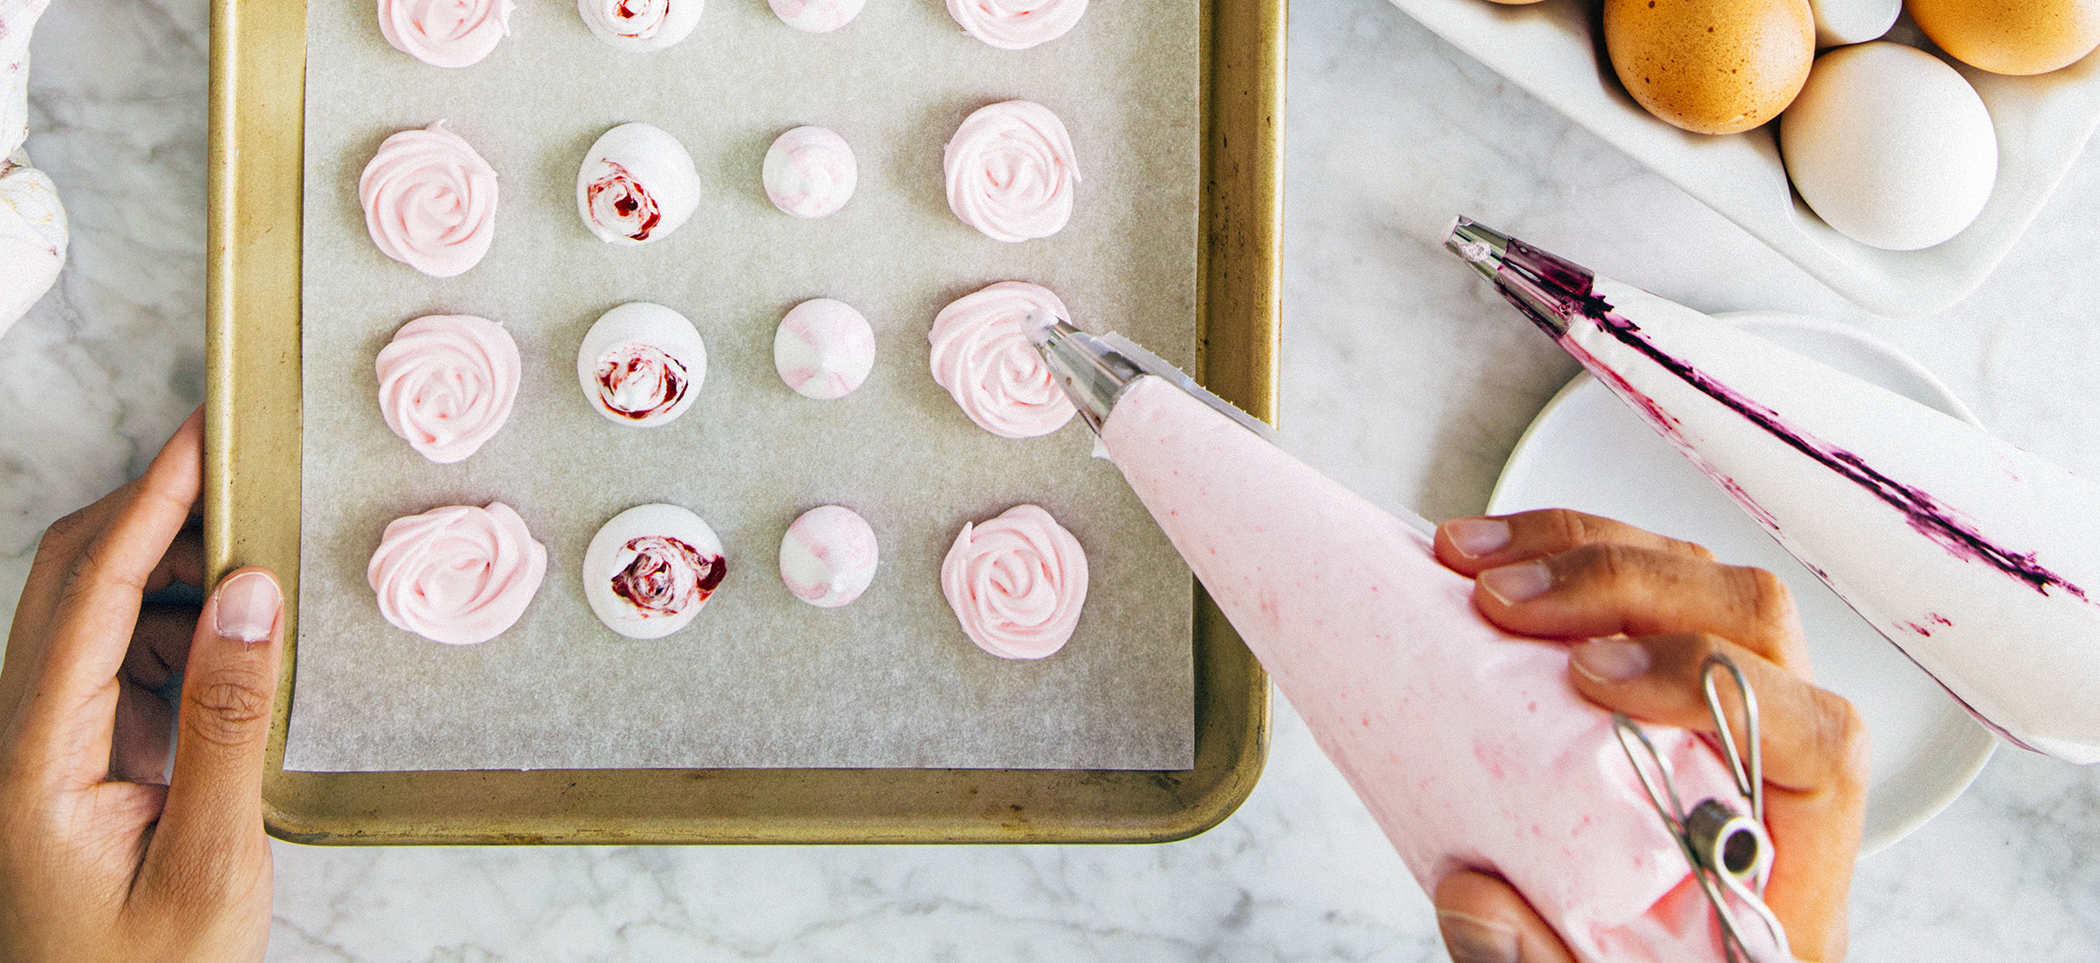 Raspberry, Rose, and Mint Striped Meringues